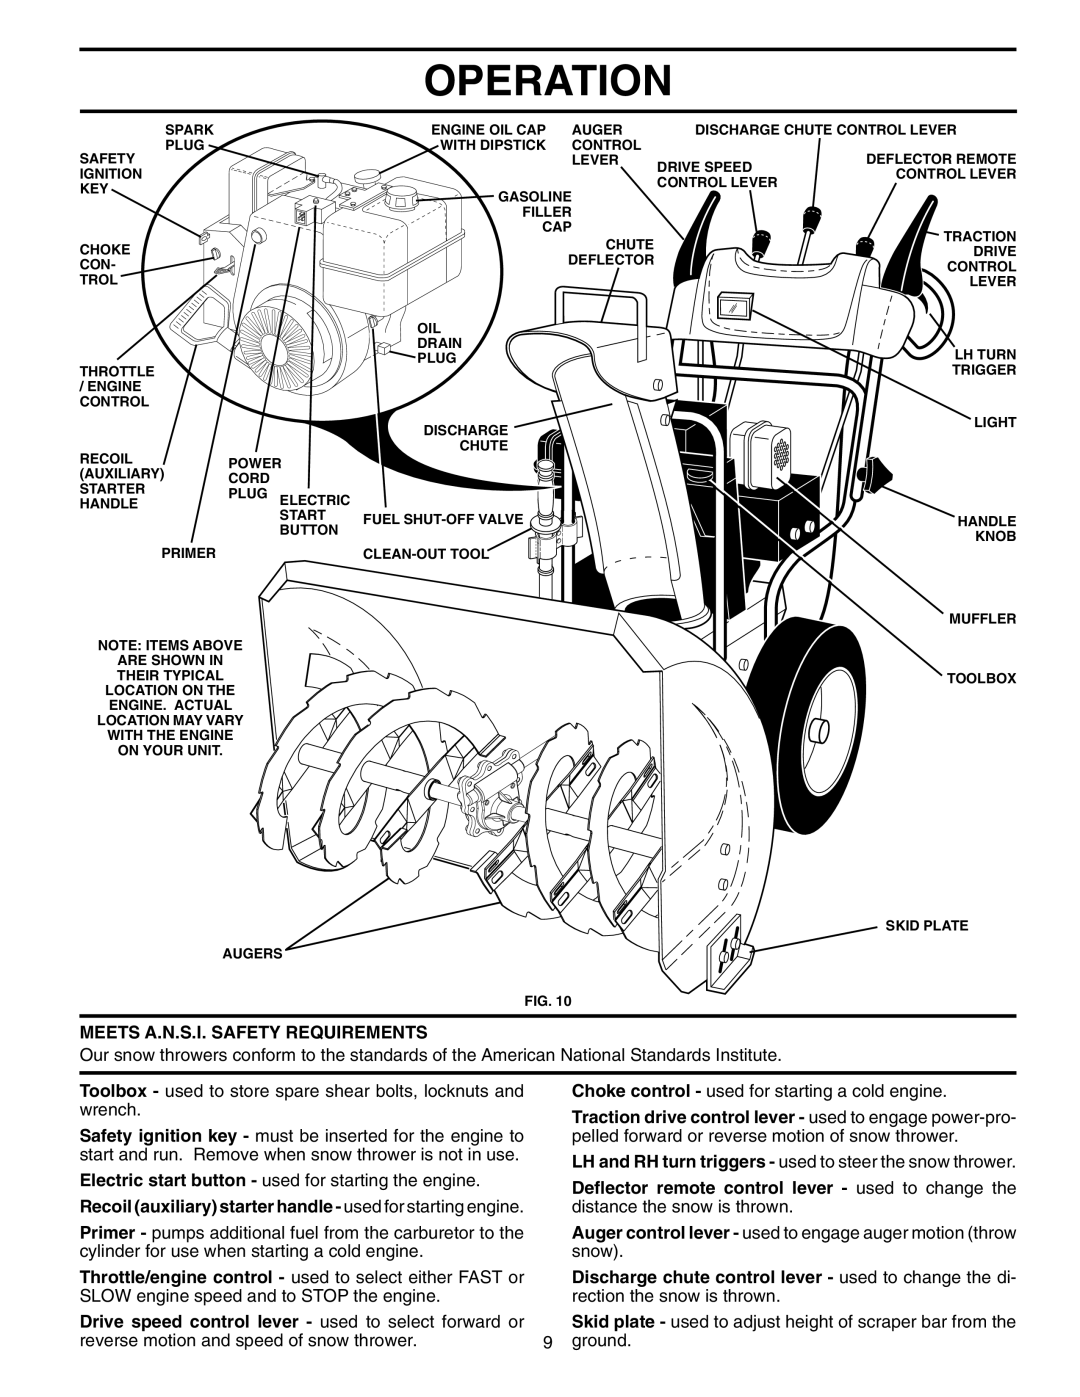 Husqvarna 10530SBE owner manual Operation, Meets A.N.S.I. Safety Requirements 